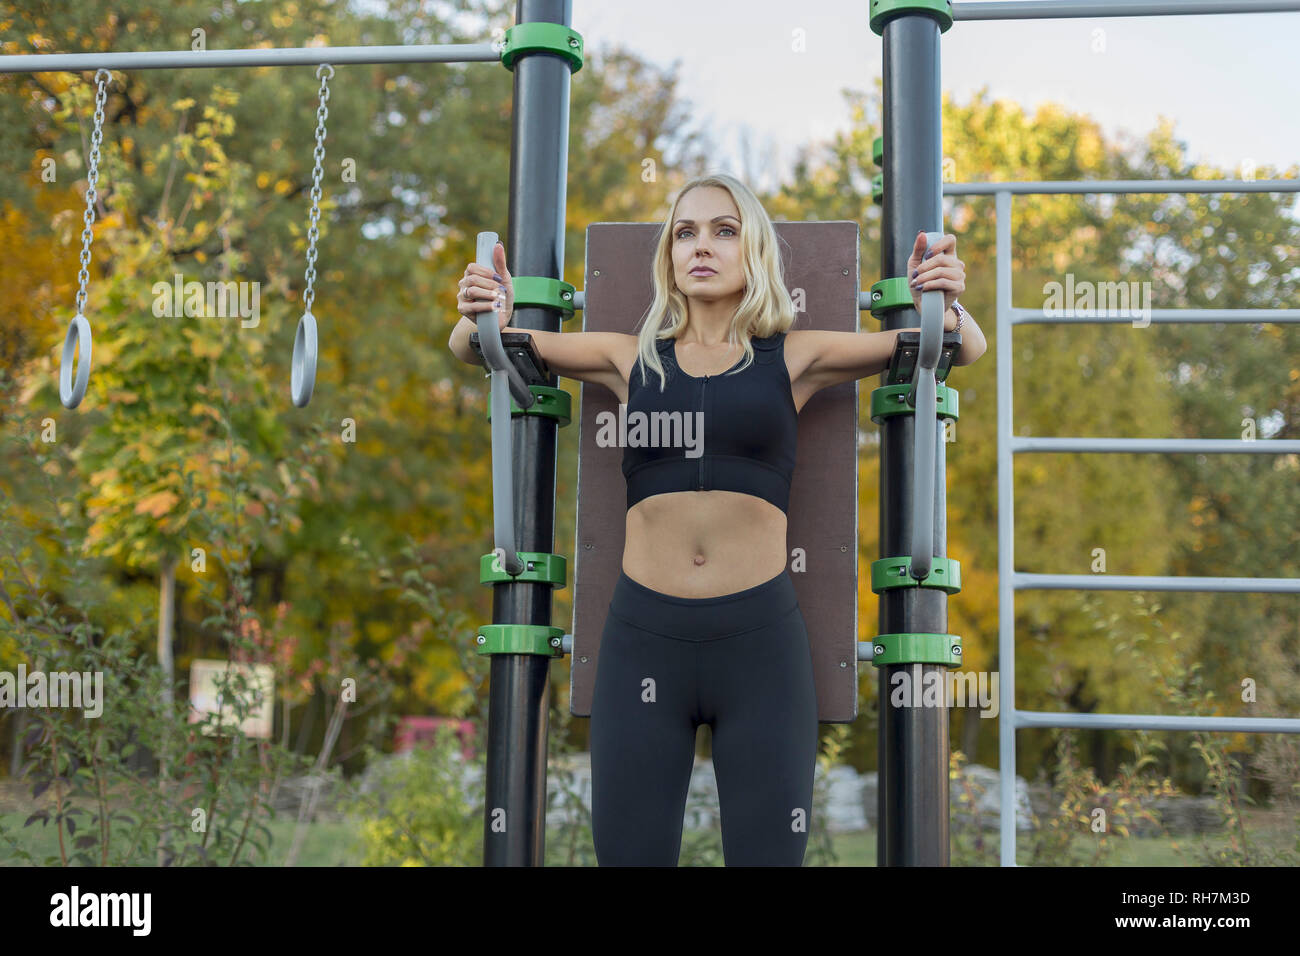 Confident, fit woman exercising in park Stock Photo